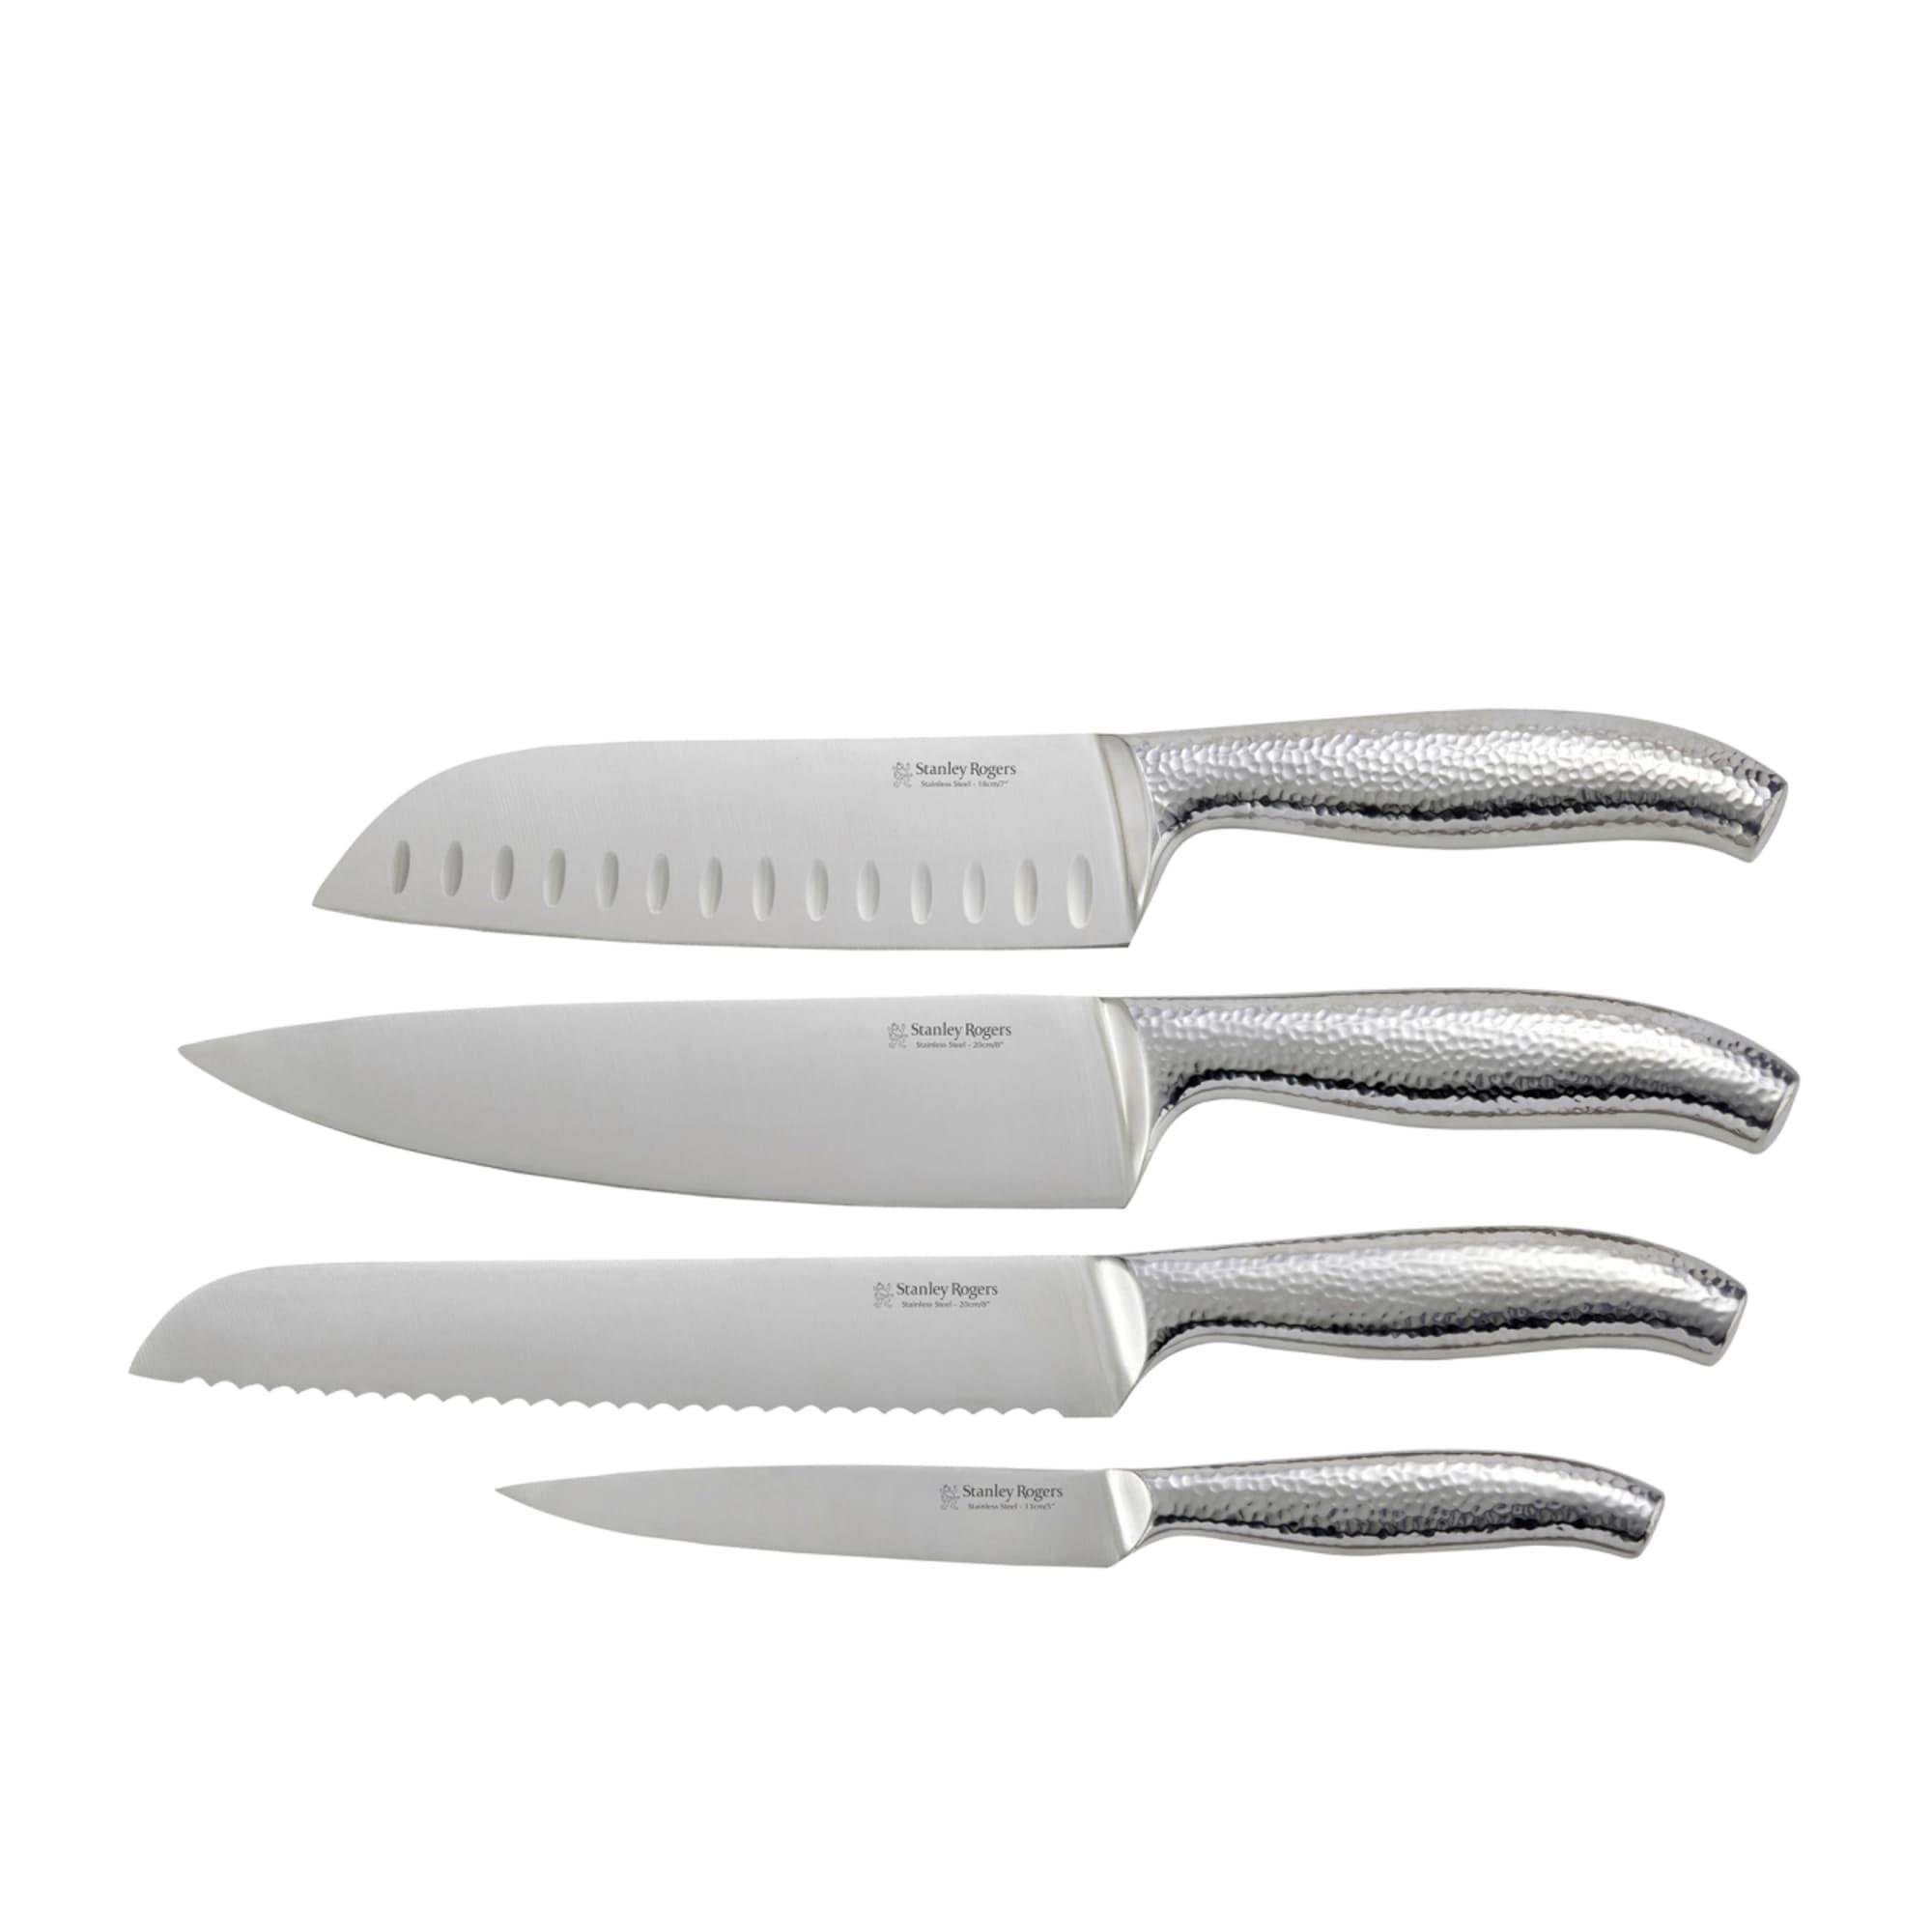 Stanley Rogers 5pc Oval Domed Knife Block Set Image 2